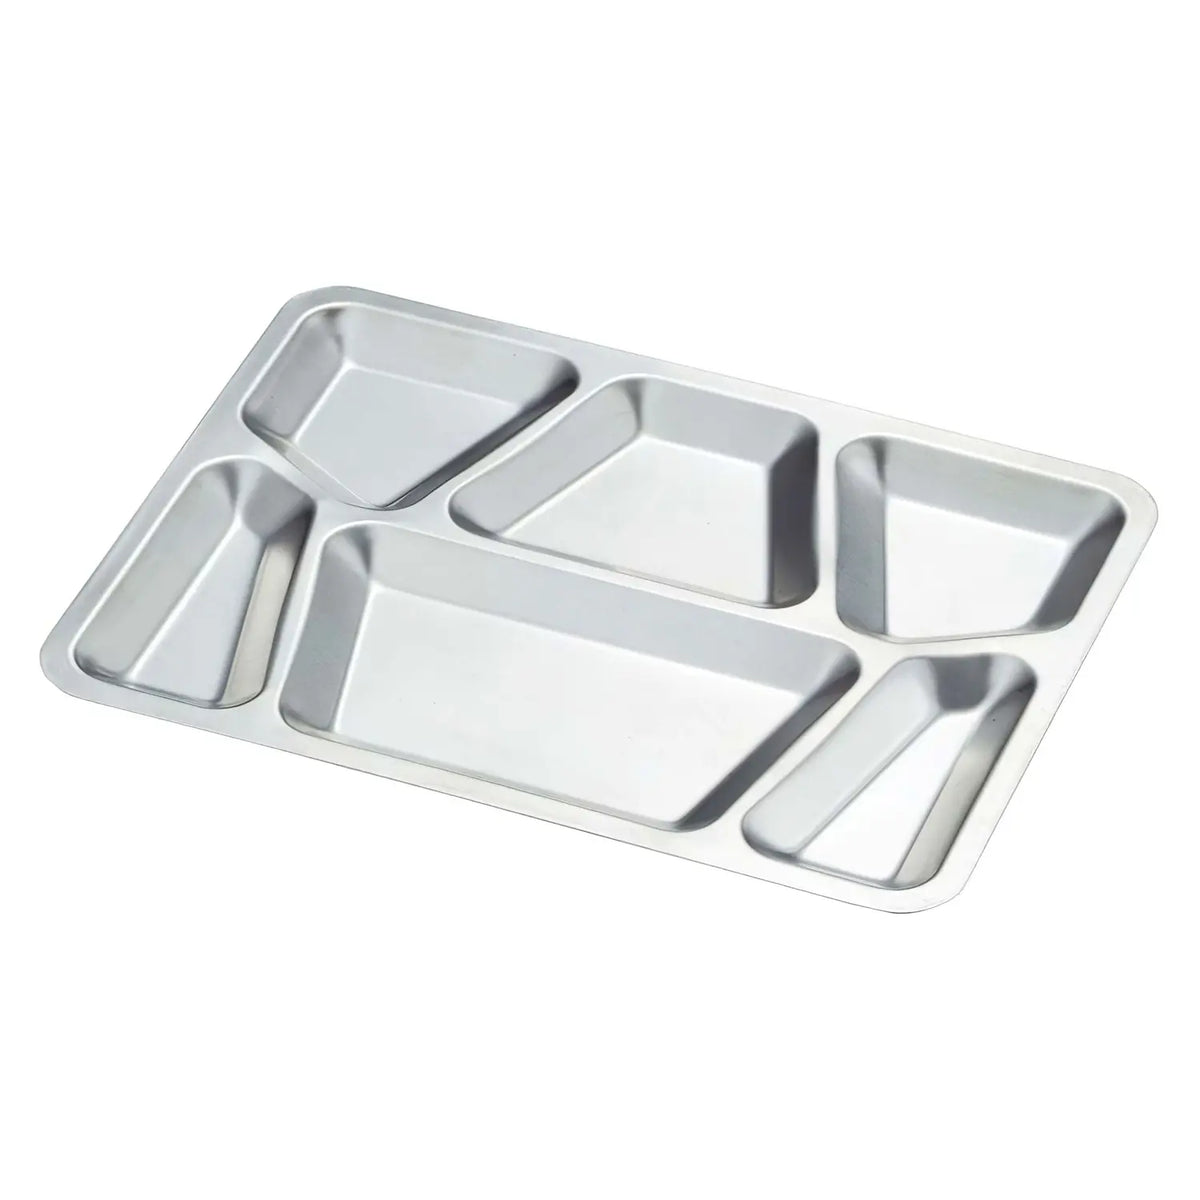 Nihon Metal Works Eco Clean Stainless Steel 6 Compartments Lunch Tray